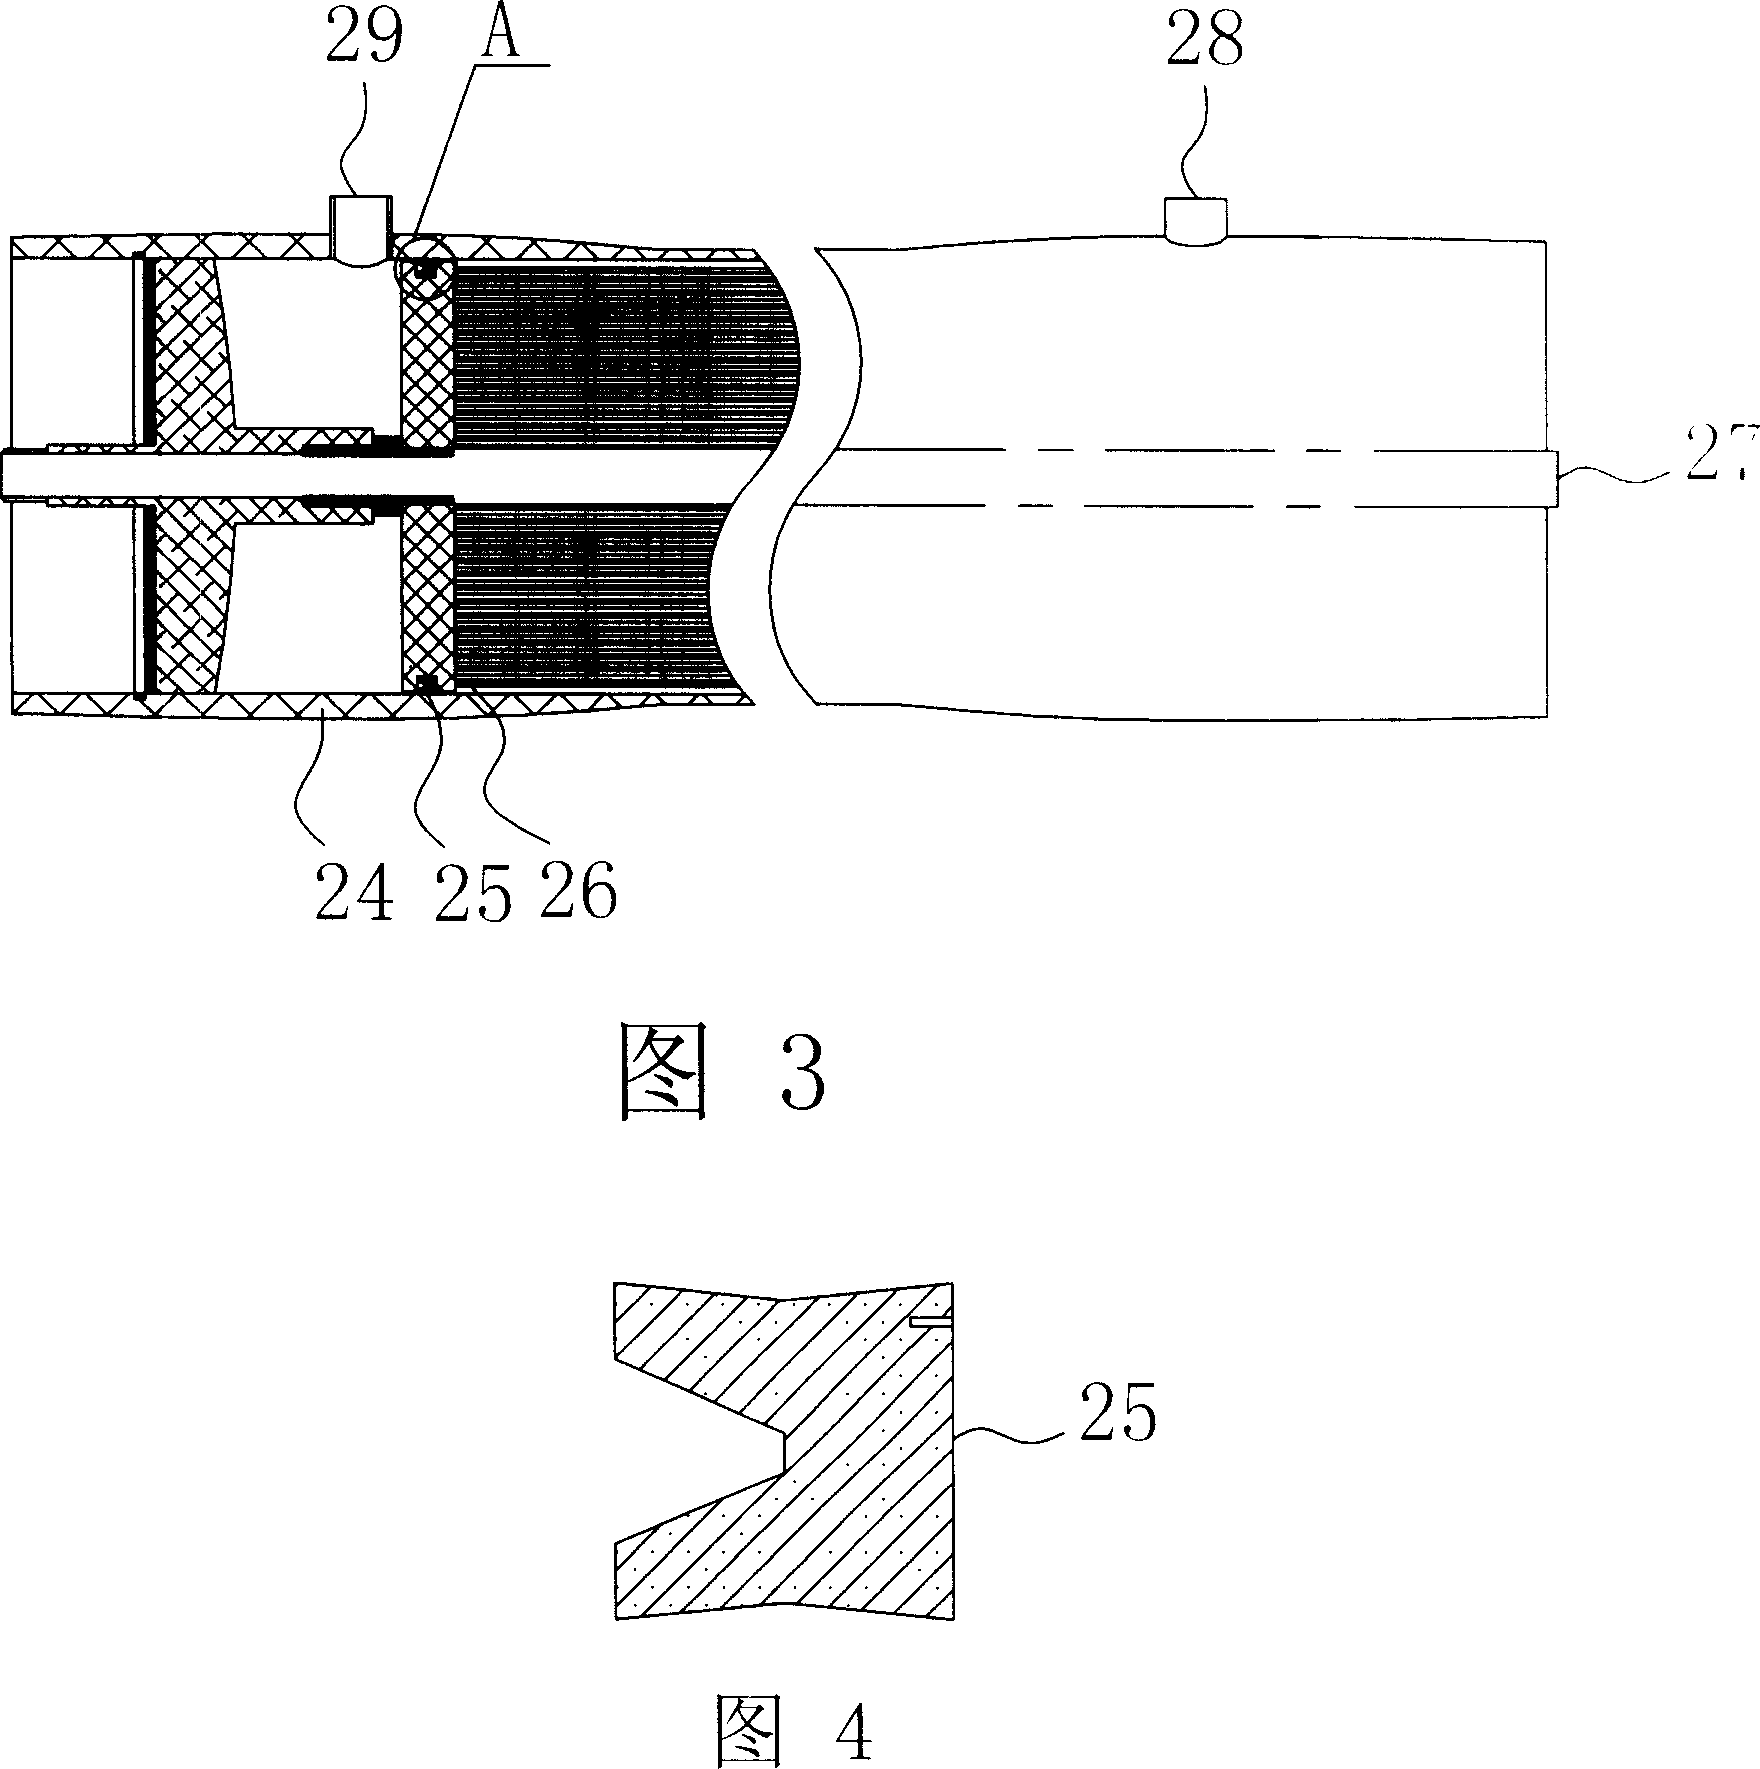 Reverse osmosis system for realizing on-line backwashing utilizing reverse osmosis system cleaning device